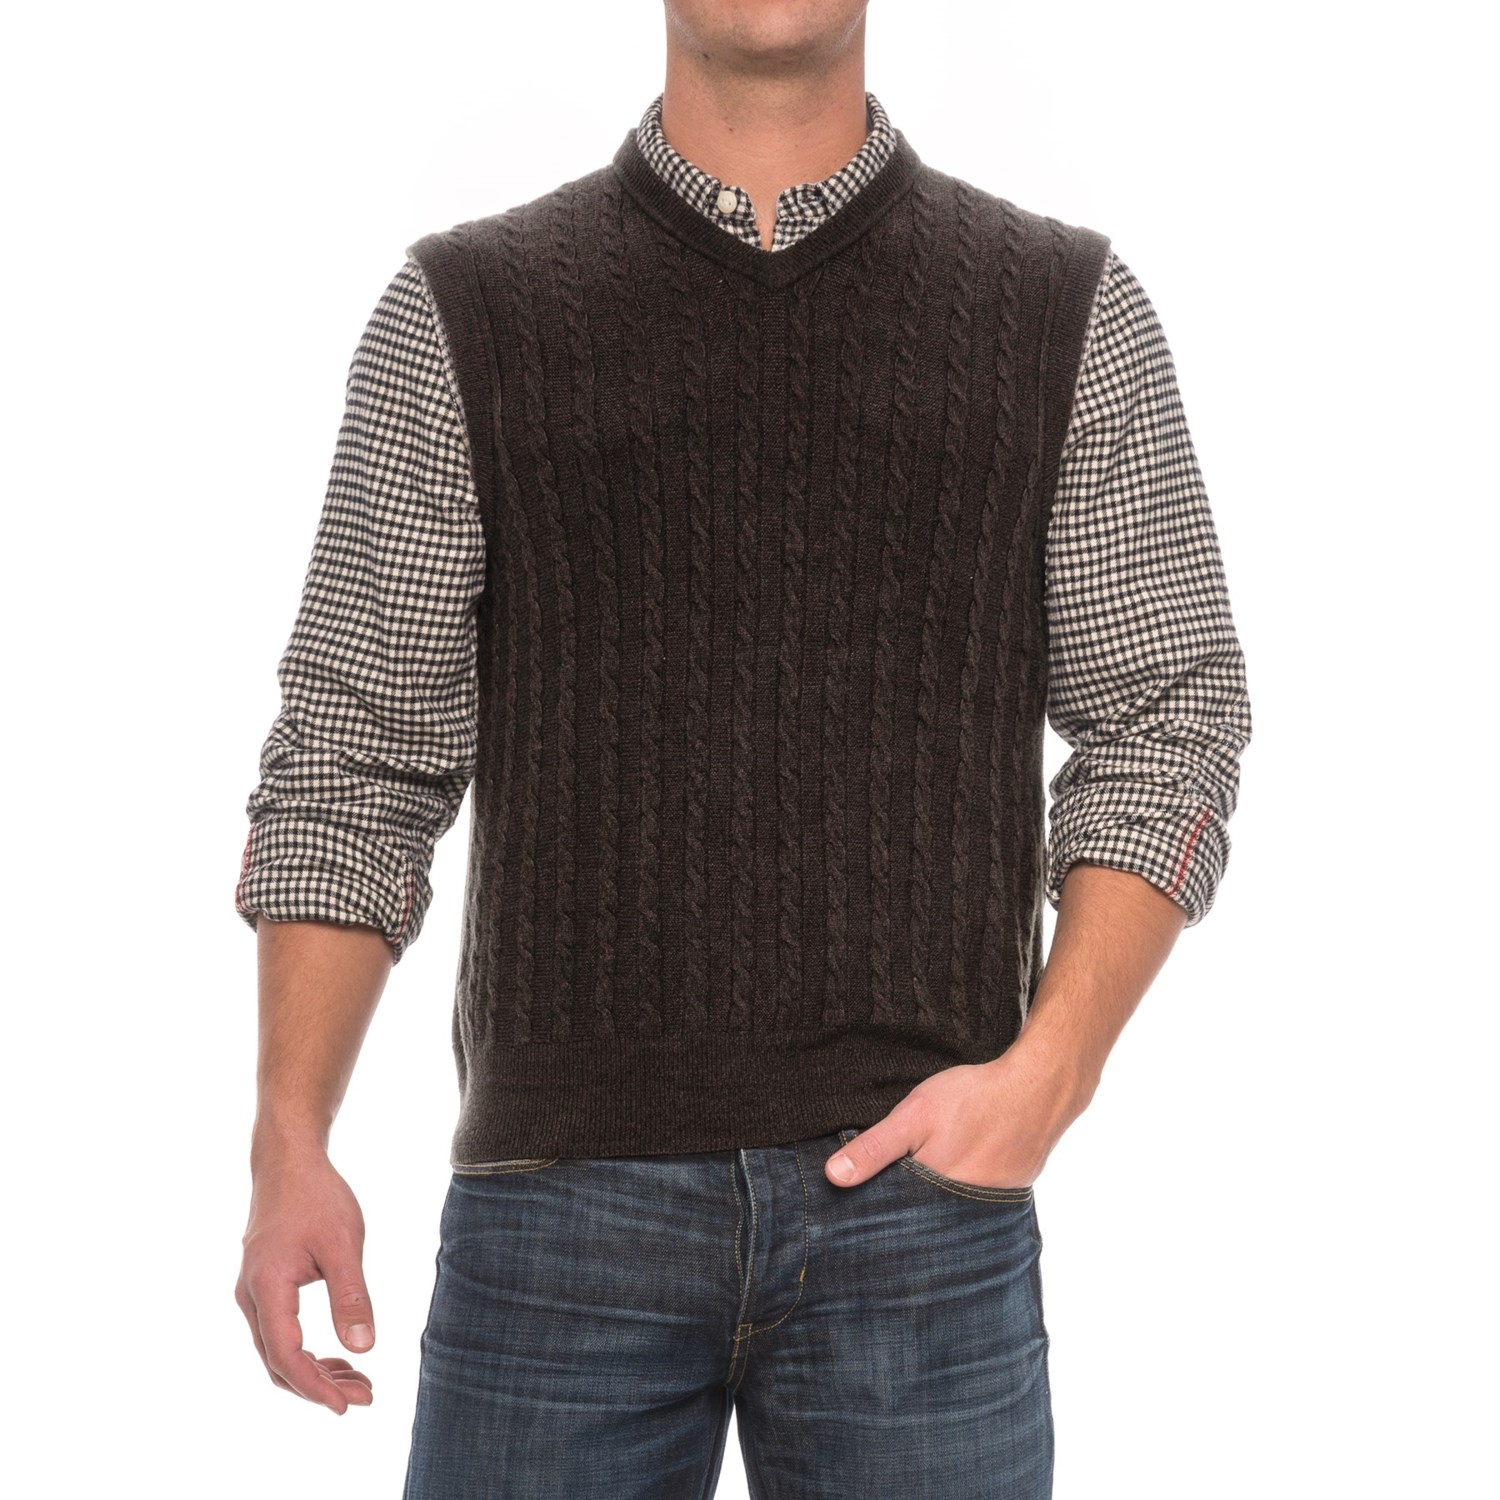 Cable-Knit Sweater Vest (For Men) - Save 60%